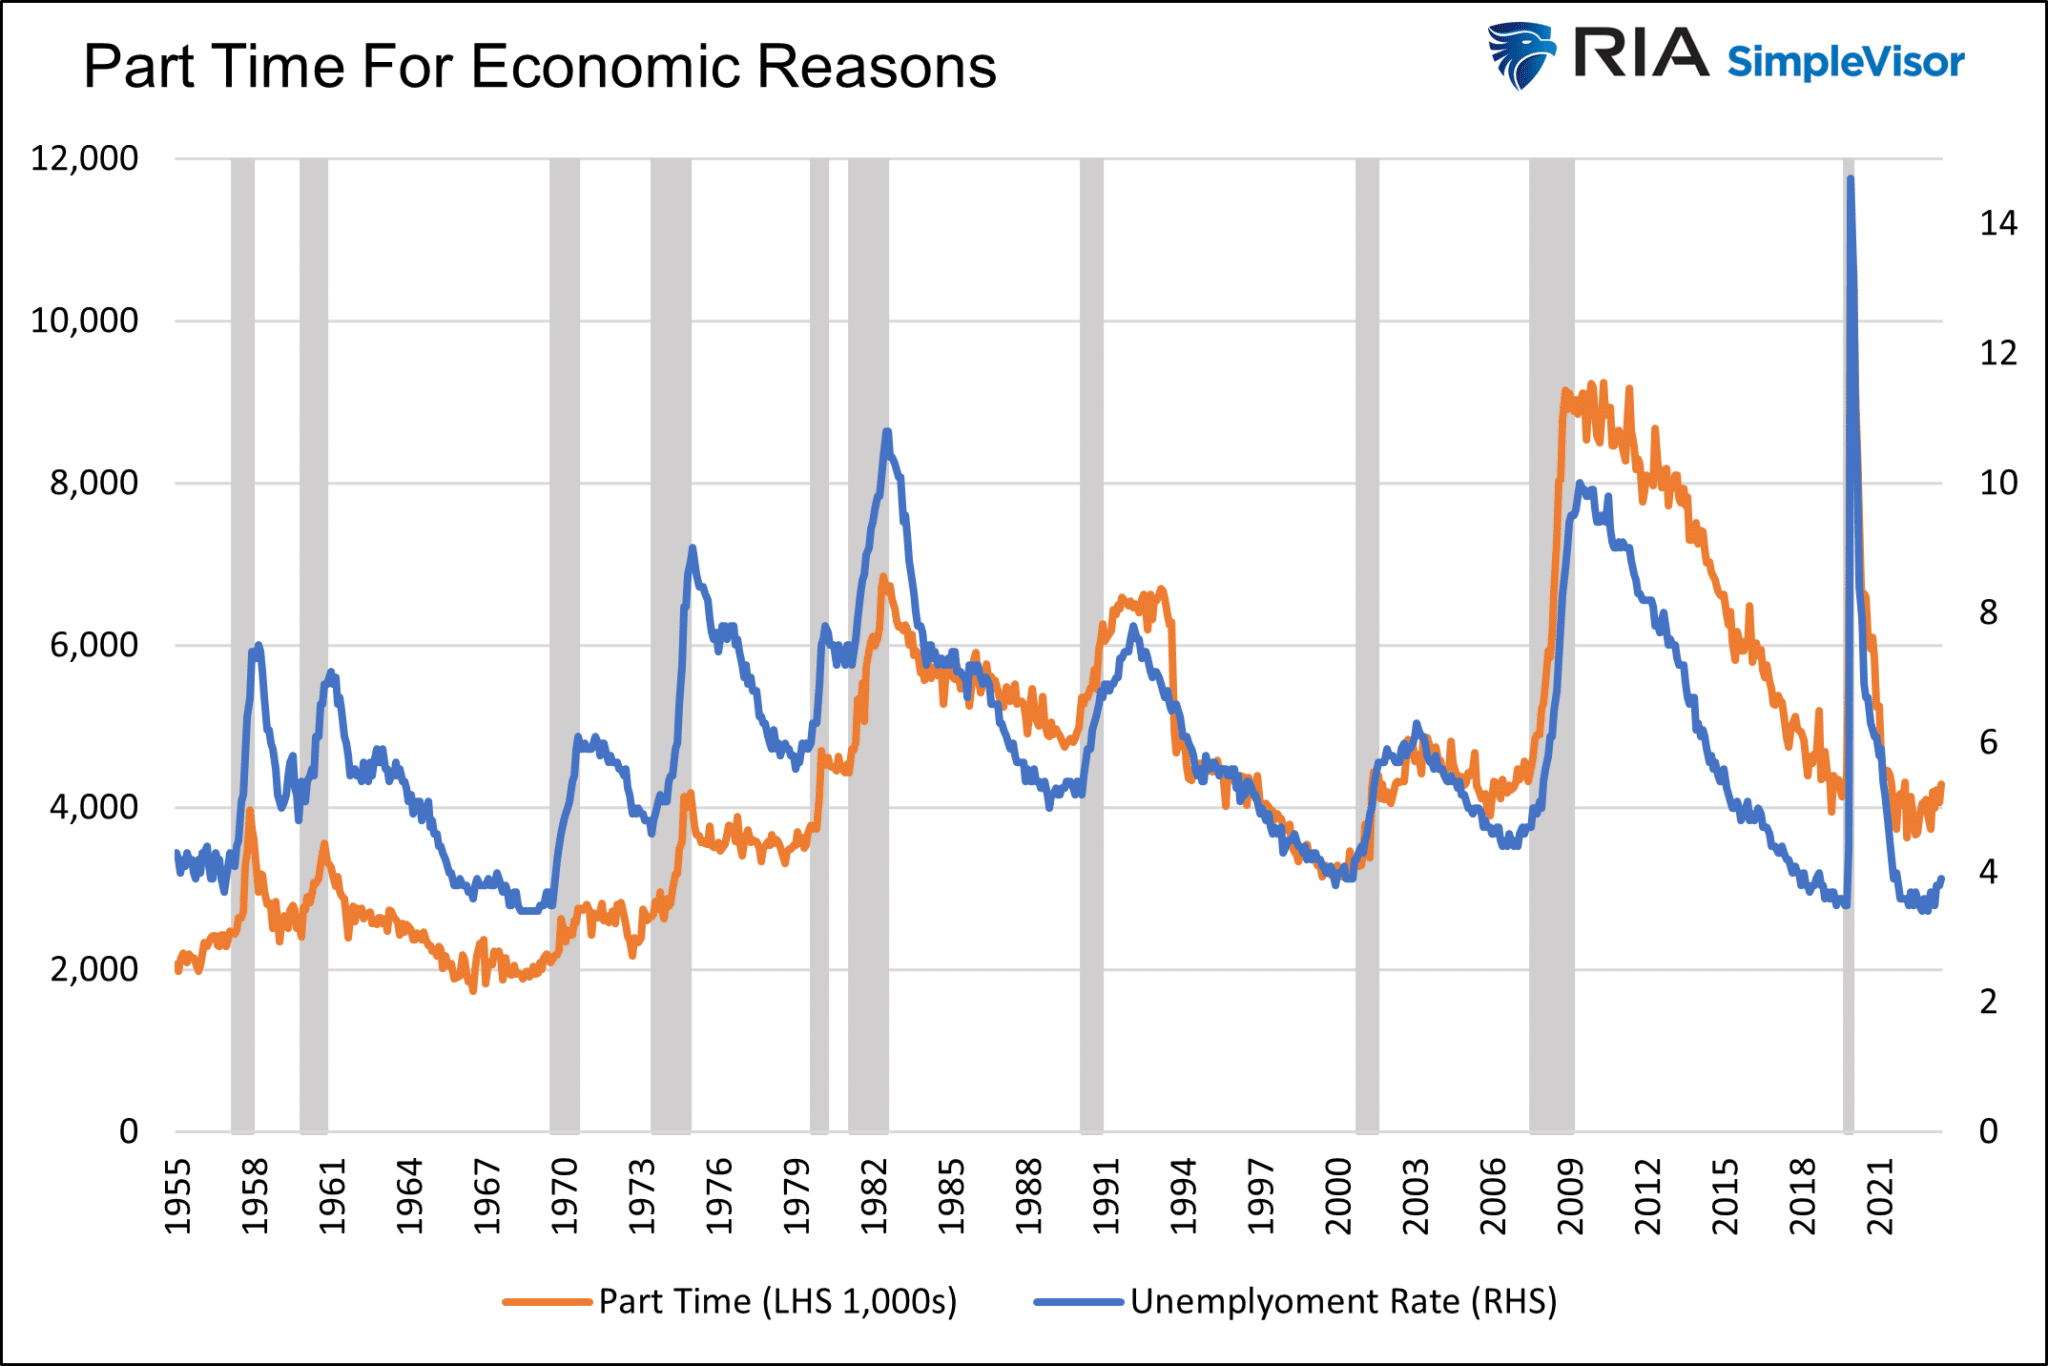 Part Time for Economic Reasons